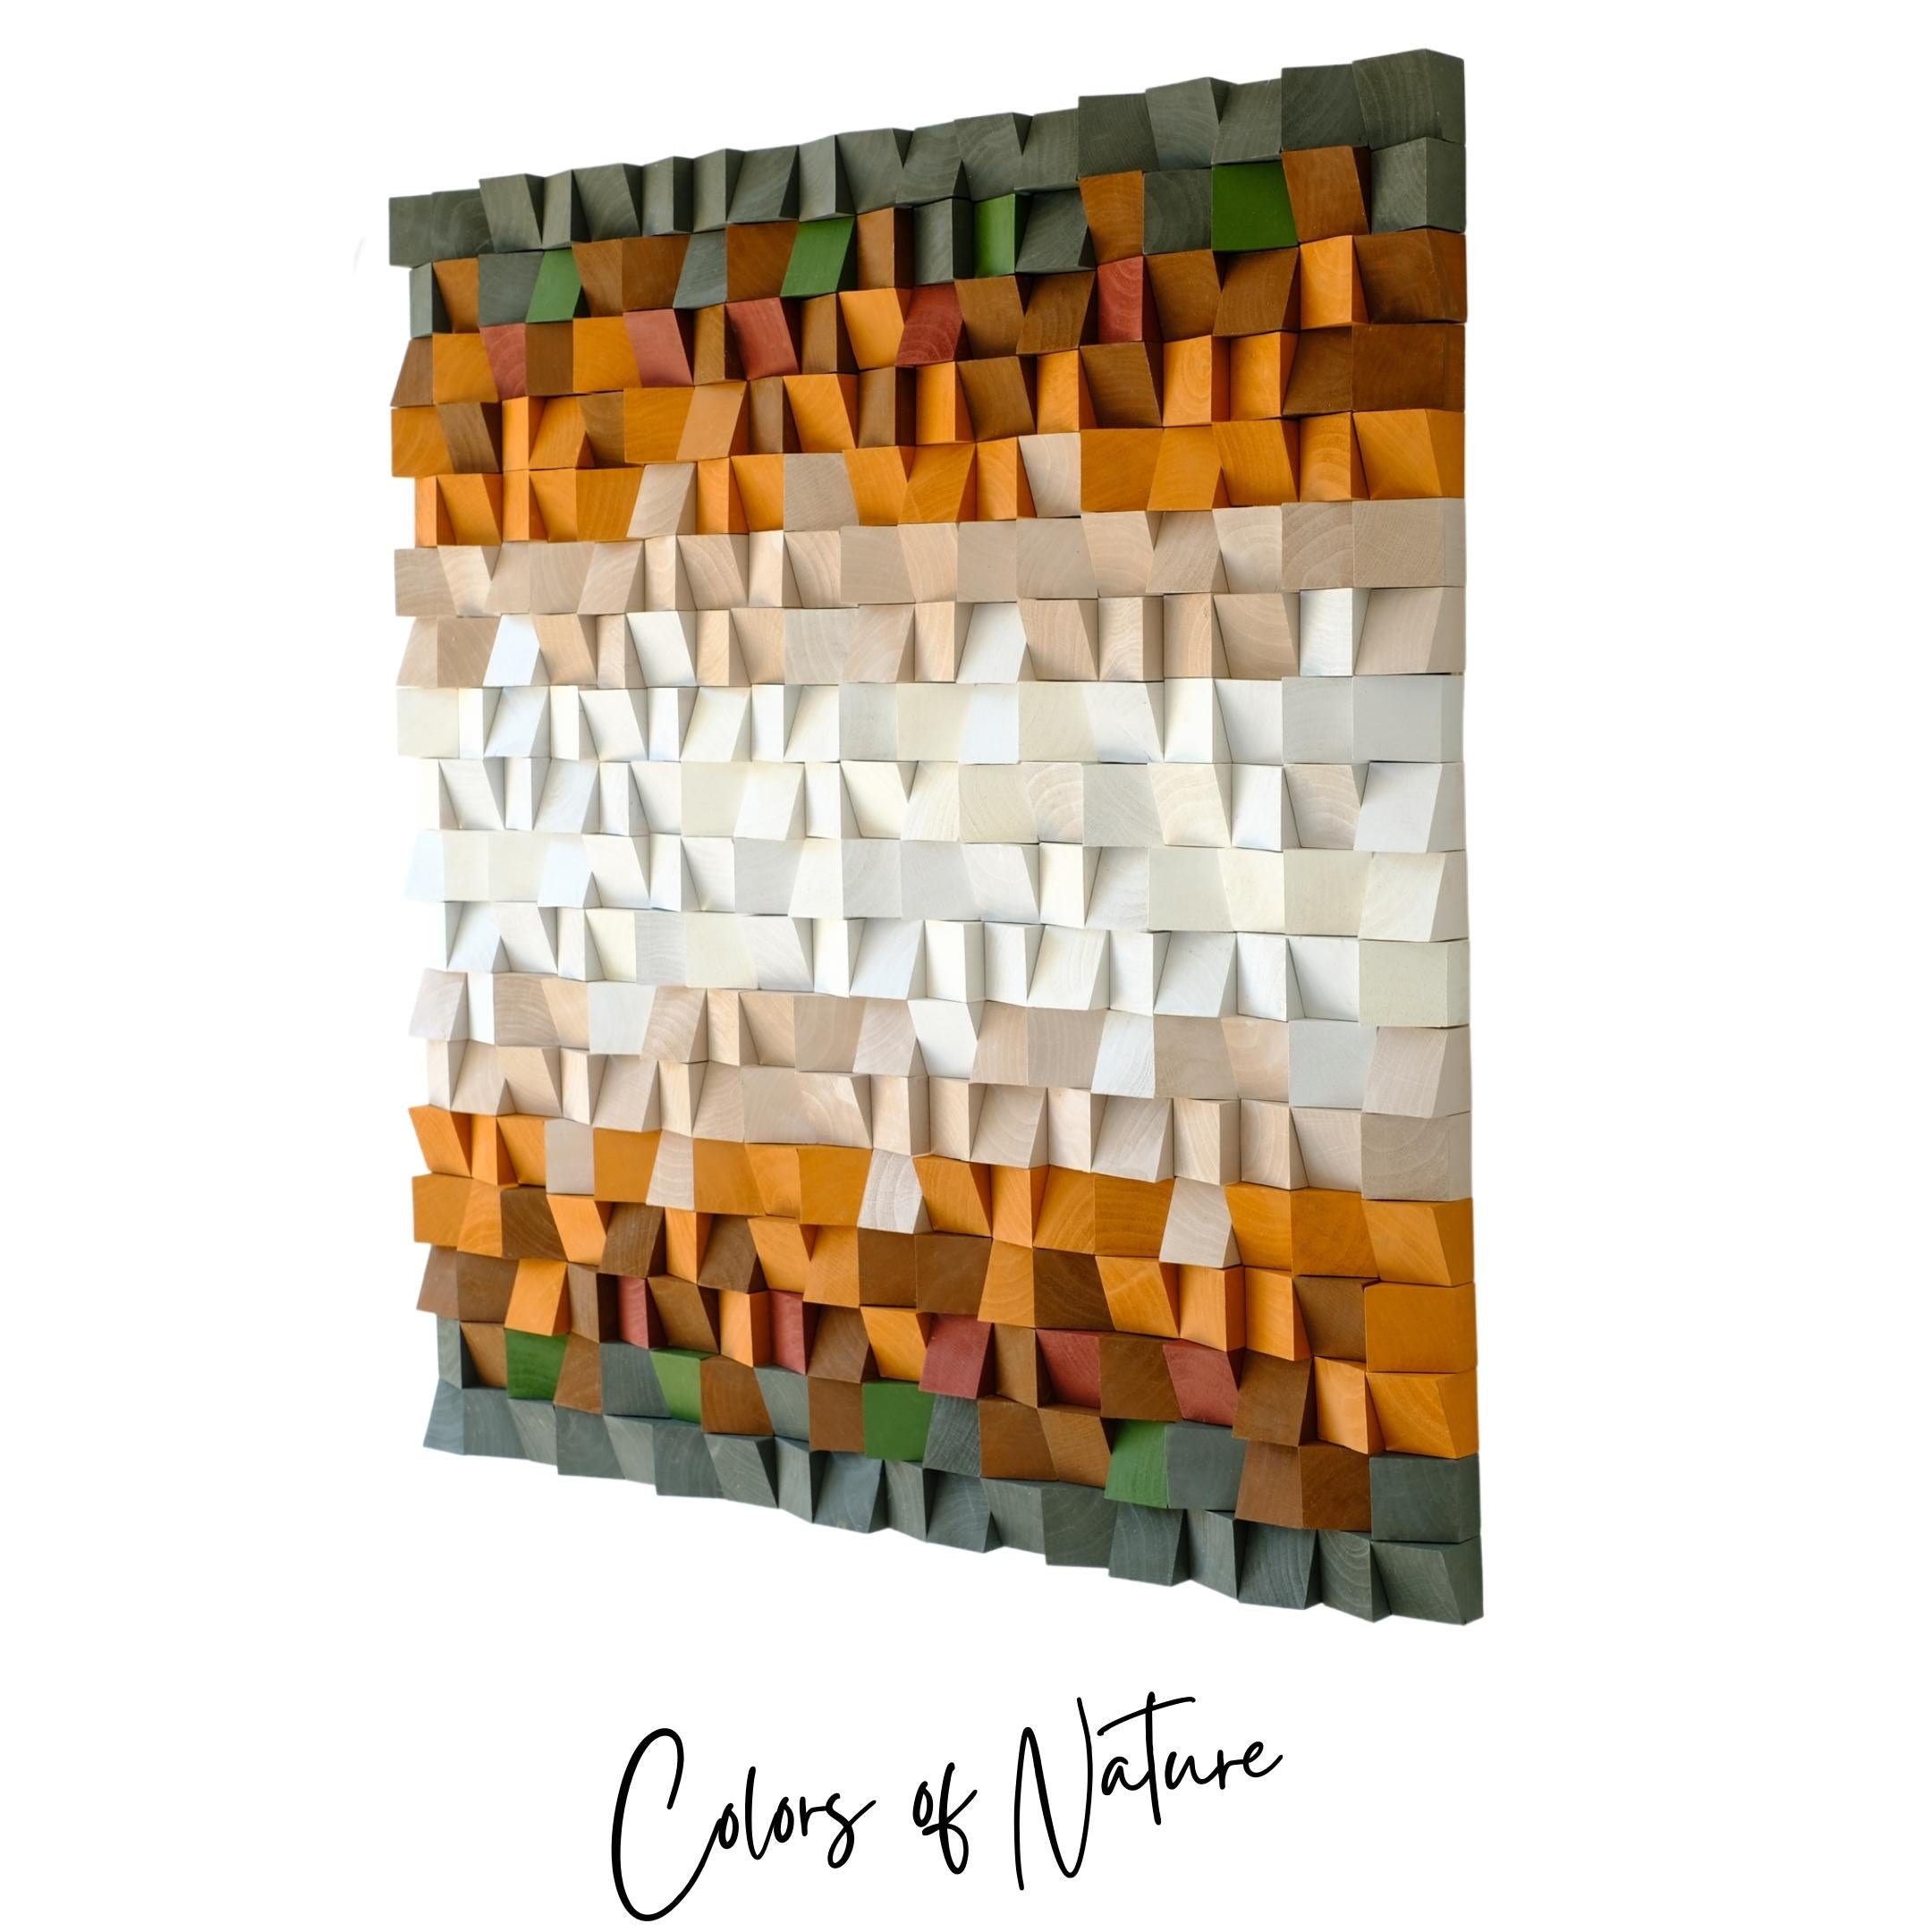 ・"Colors of Nature"・Premium Wood Handmade Wall Sculpture - Special Edition